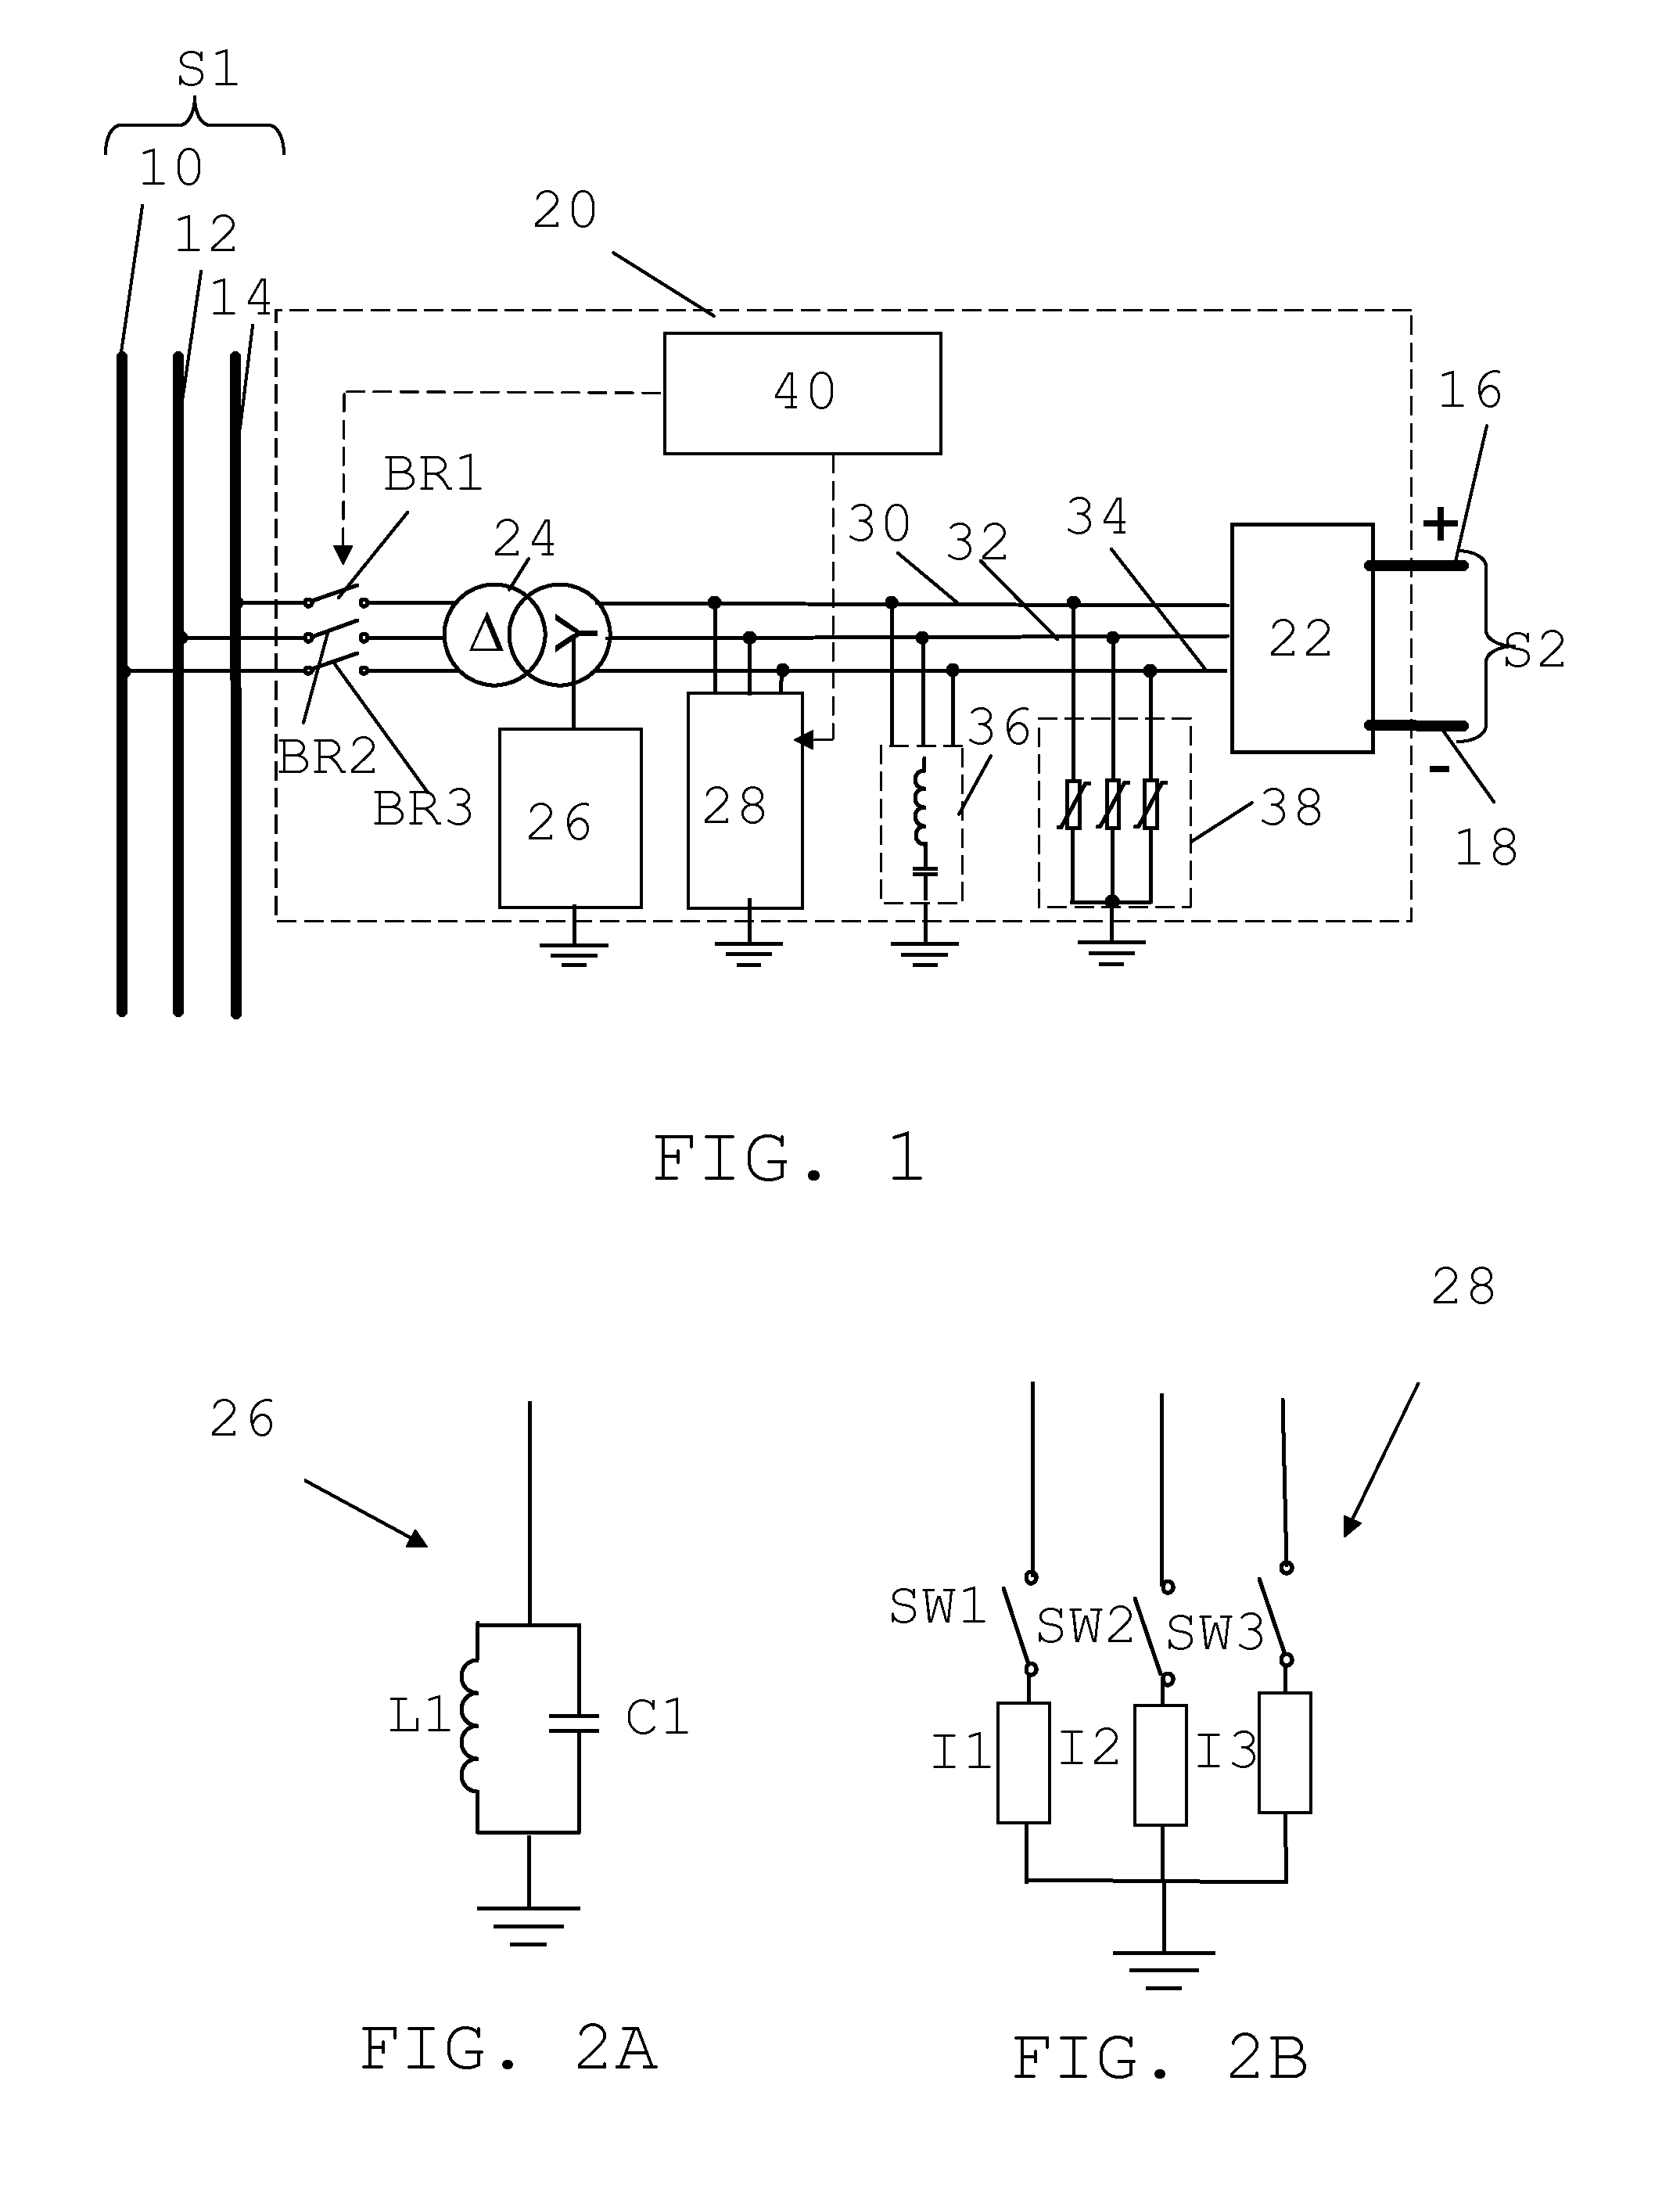 Interface arrangement between ac and DC systems using grounding switch